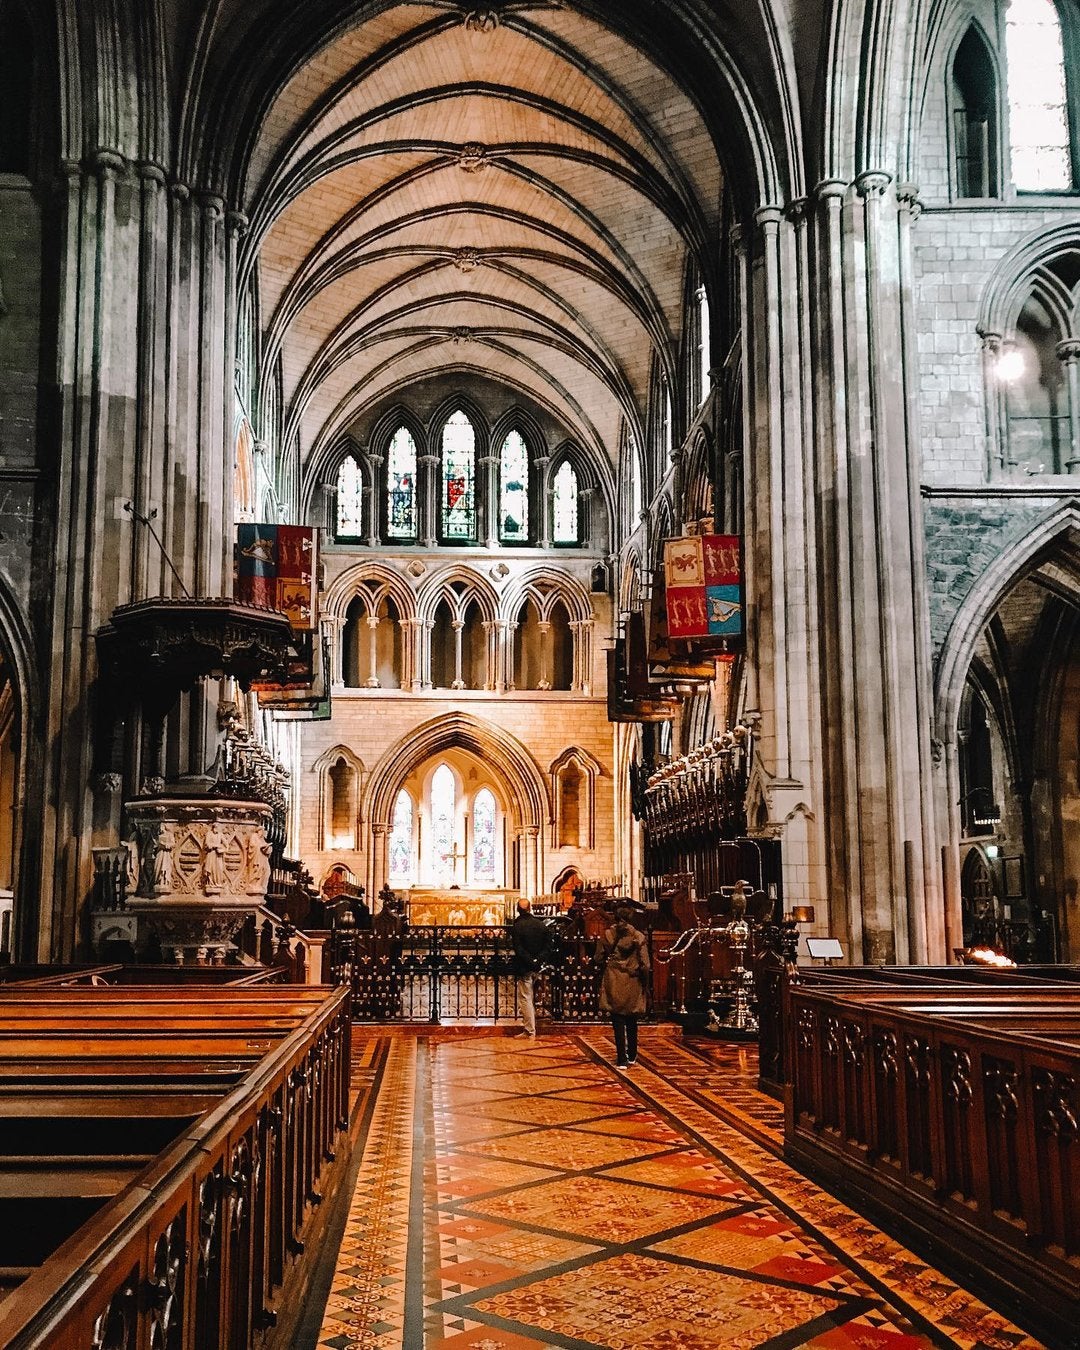 Interior of St Patrick's Cathedral in Dublin.